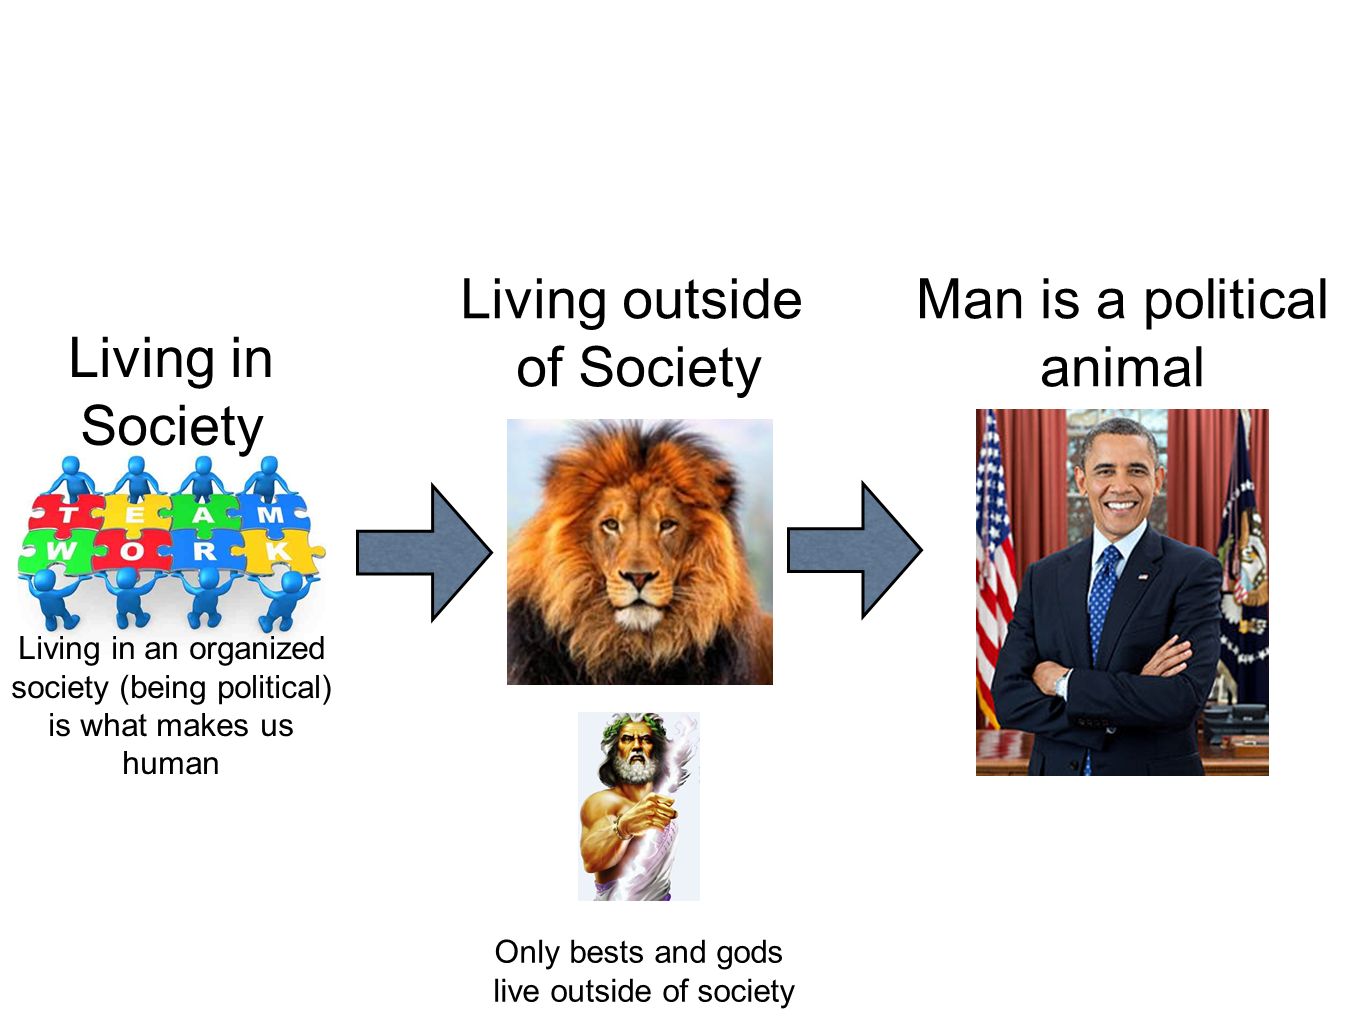 Man is by Nature a Political Animal - ppt video online download